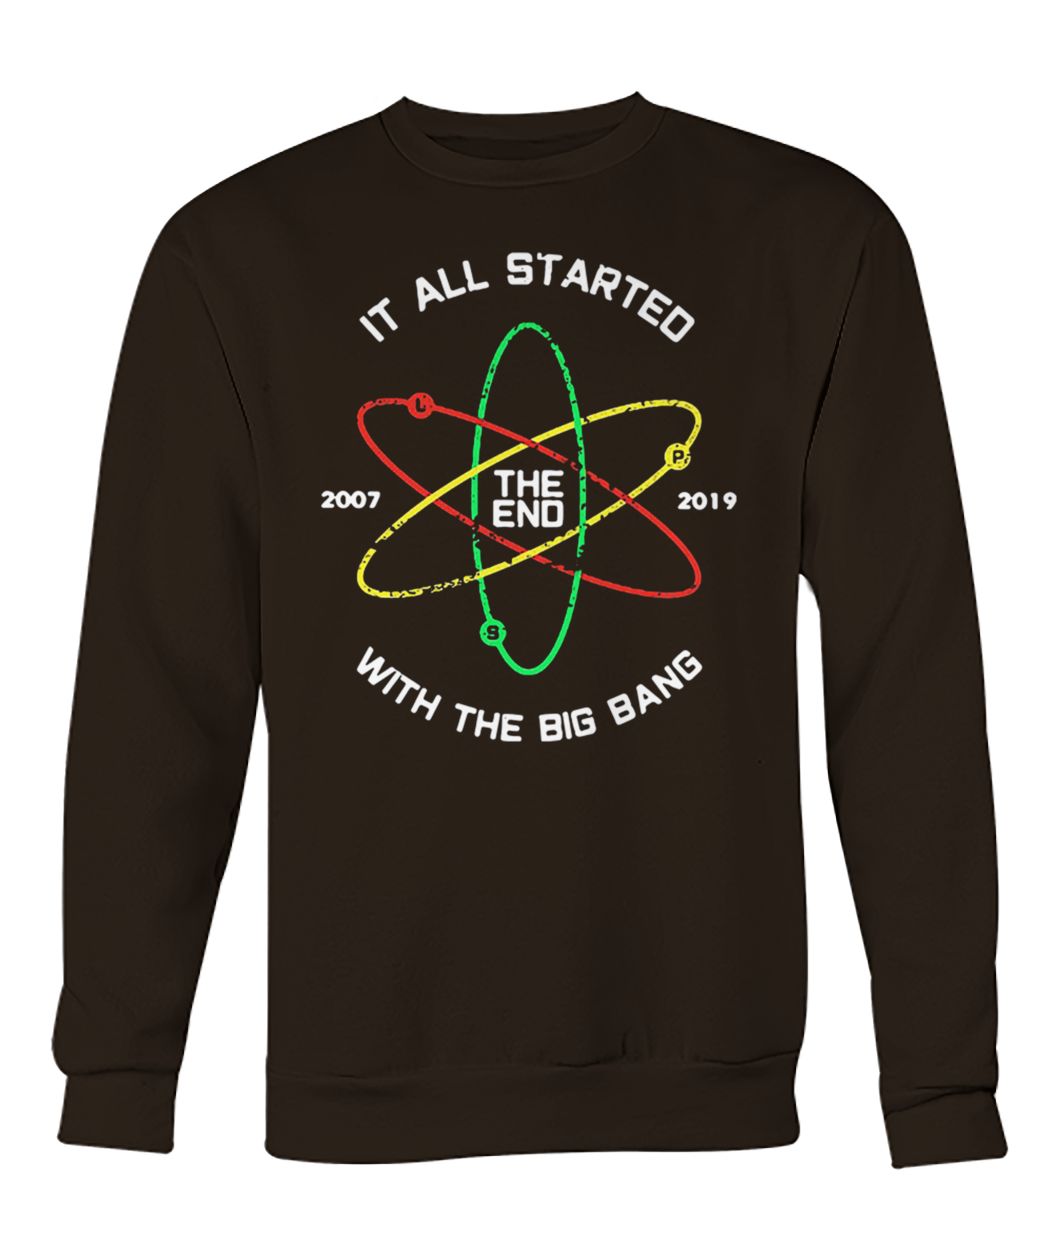 The end 2007 2019 it all started with the big bang crew neck sweatshirt